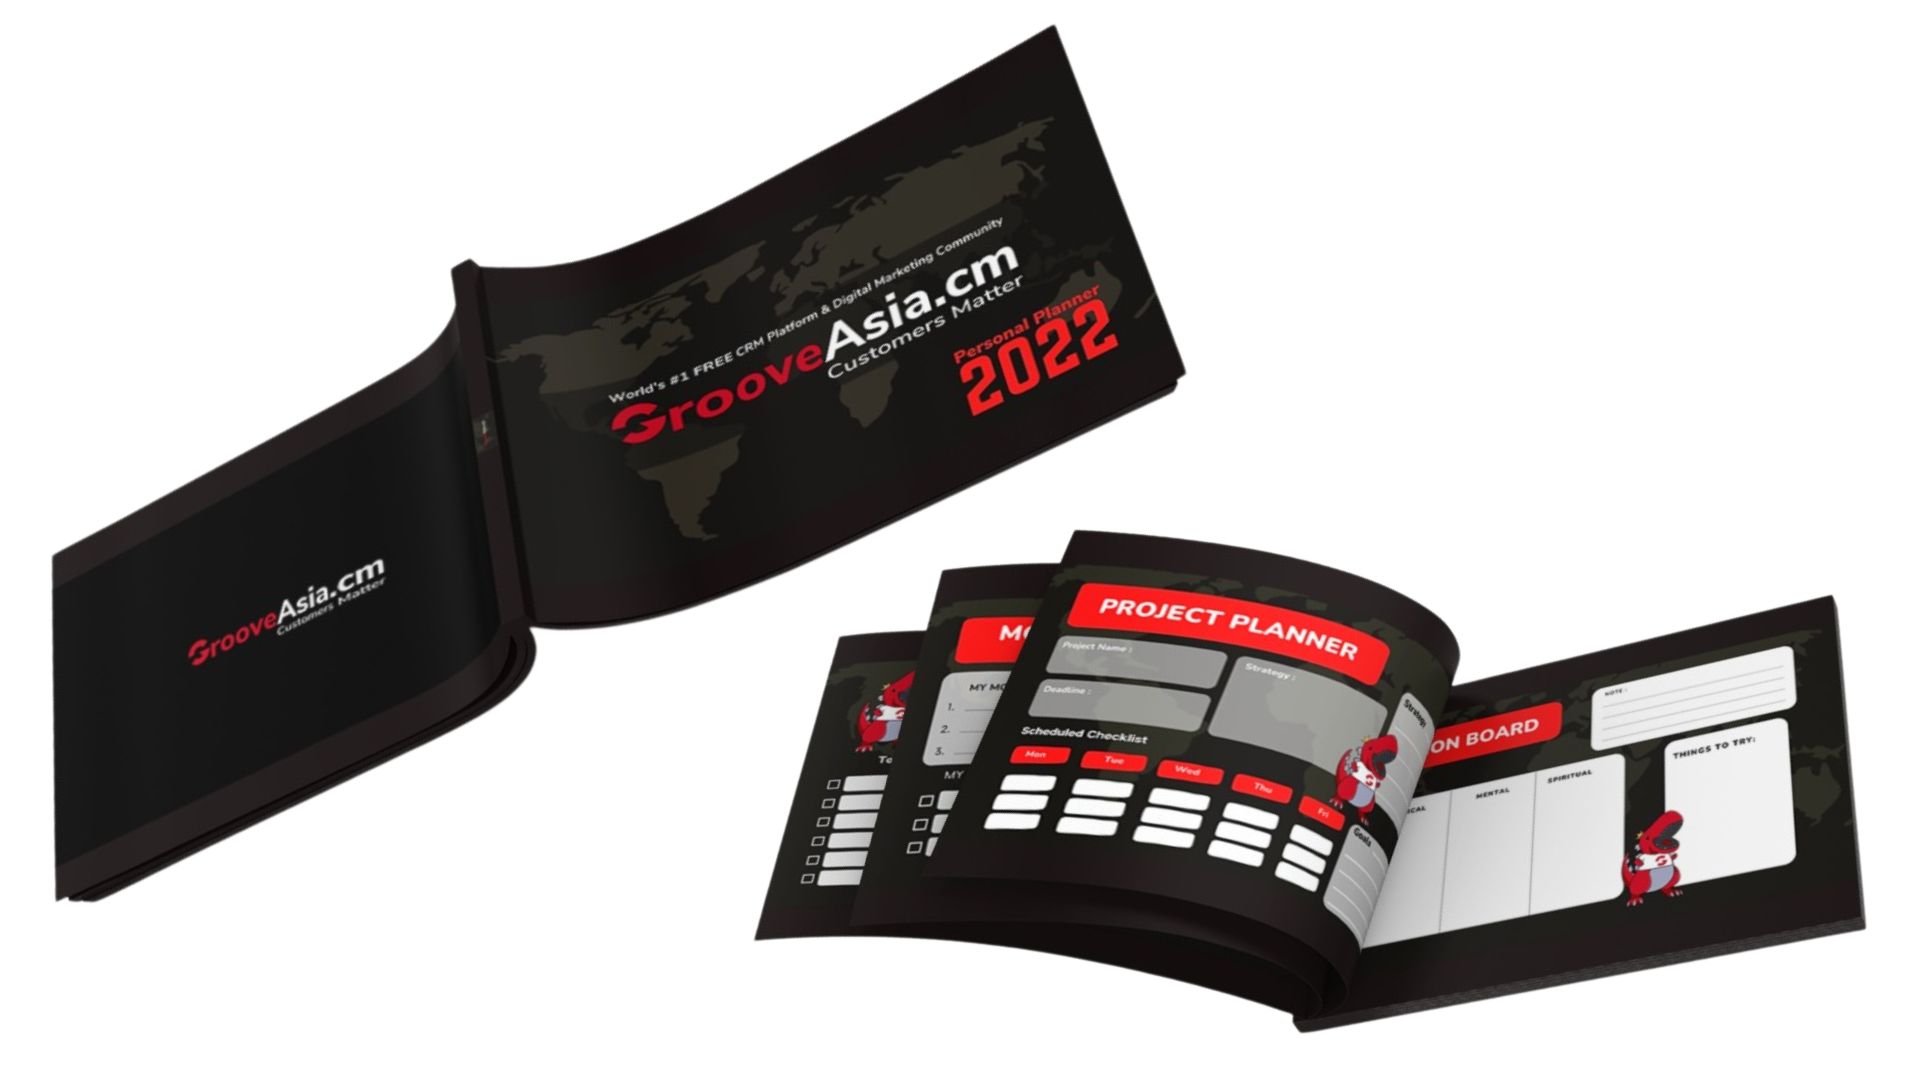 grooveasia free 2022 personal planner gift